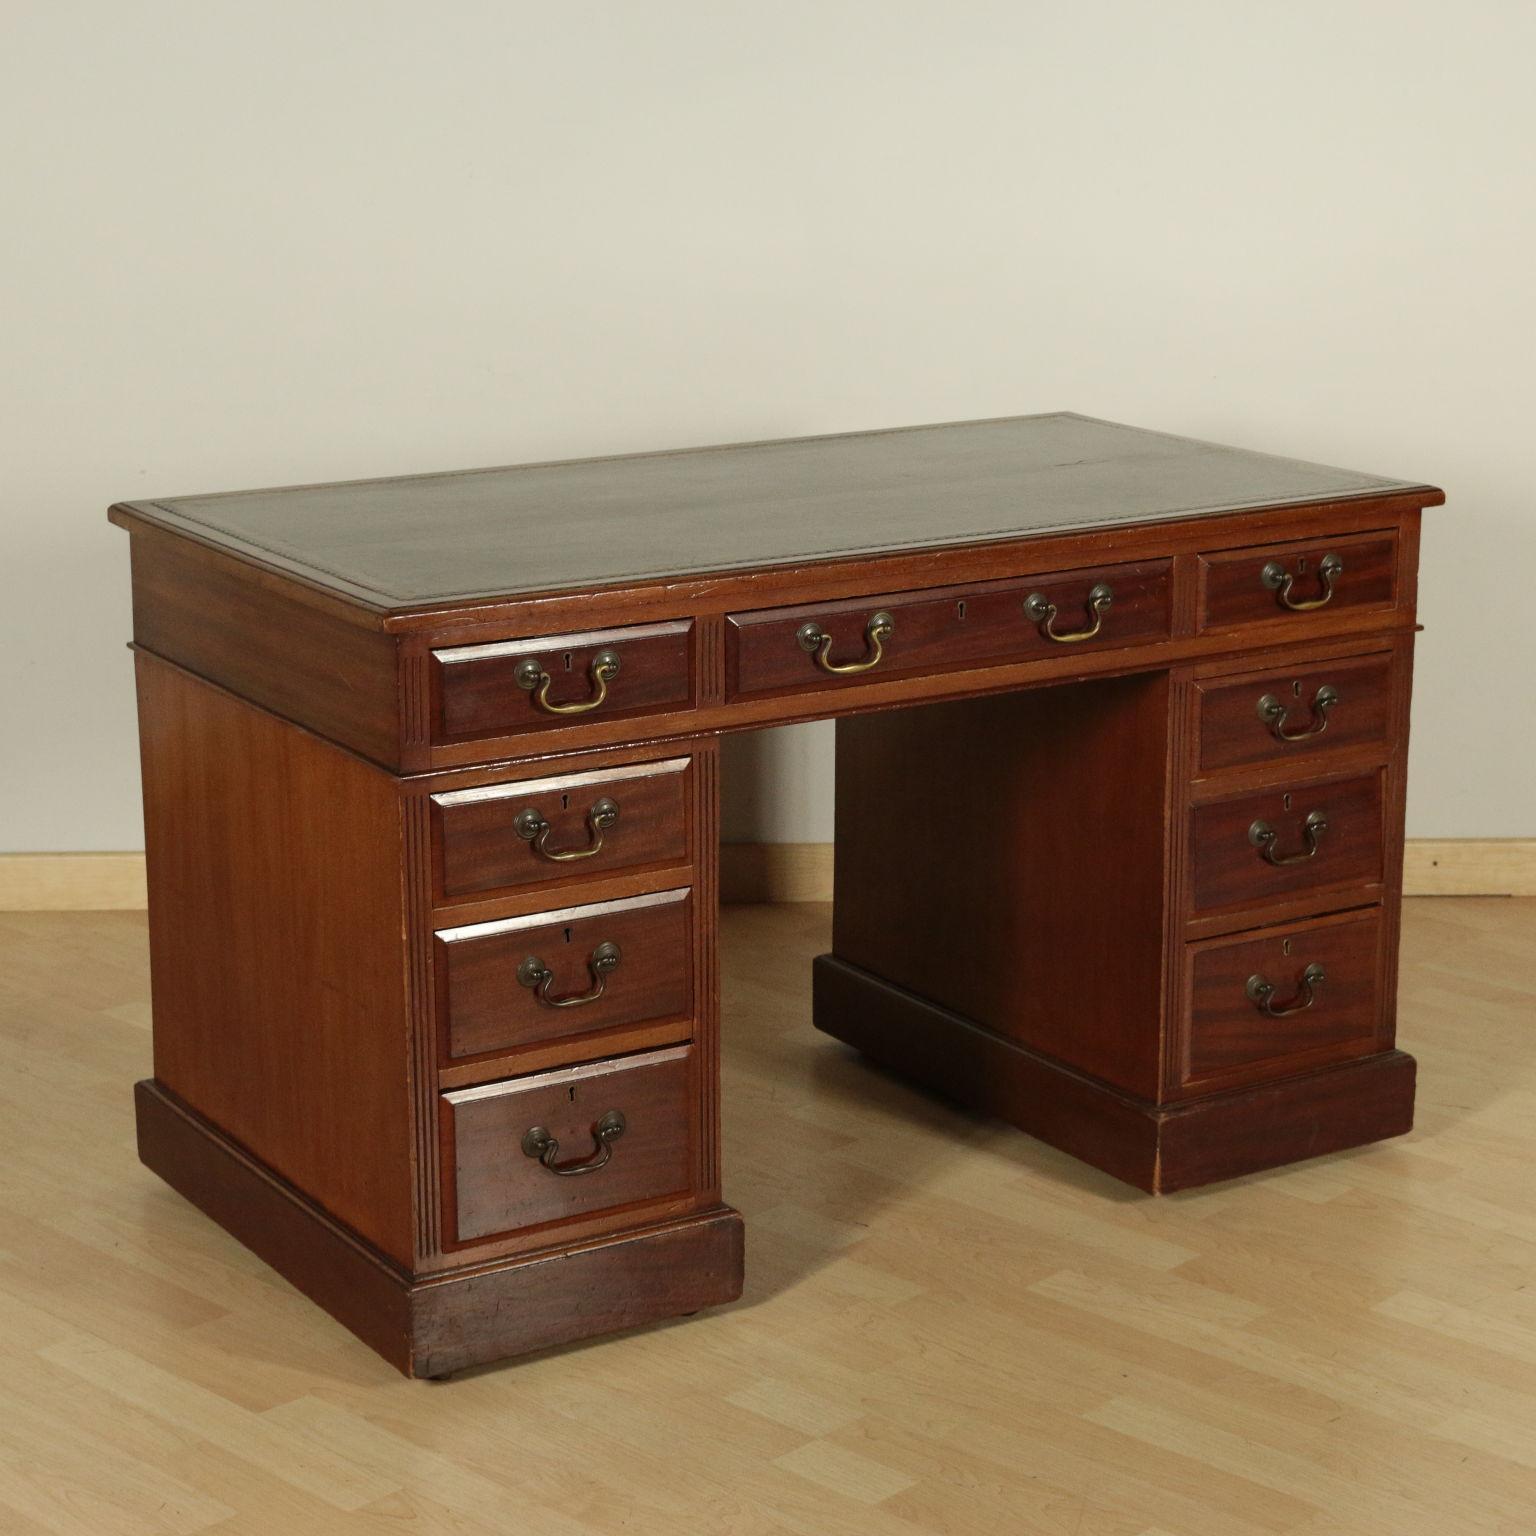 English open desk in mahogany; the uprights present a row of drawers on the front, with one in the middle in the under-the-top band.